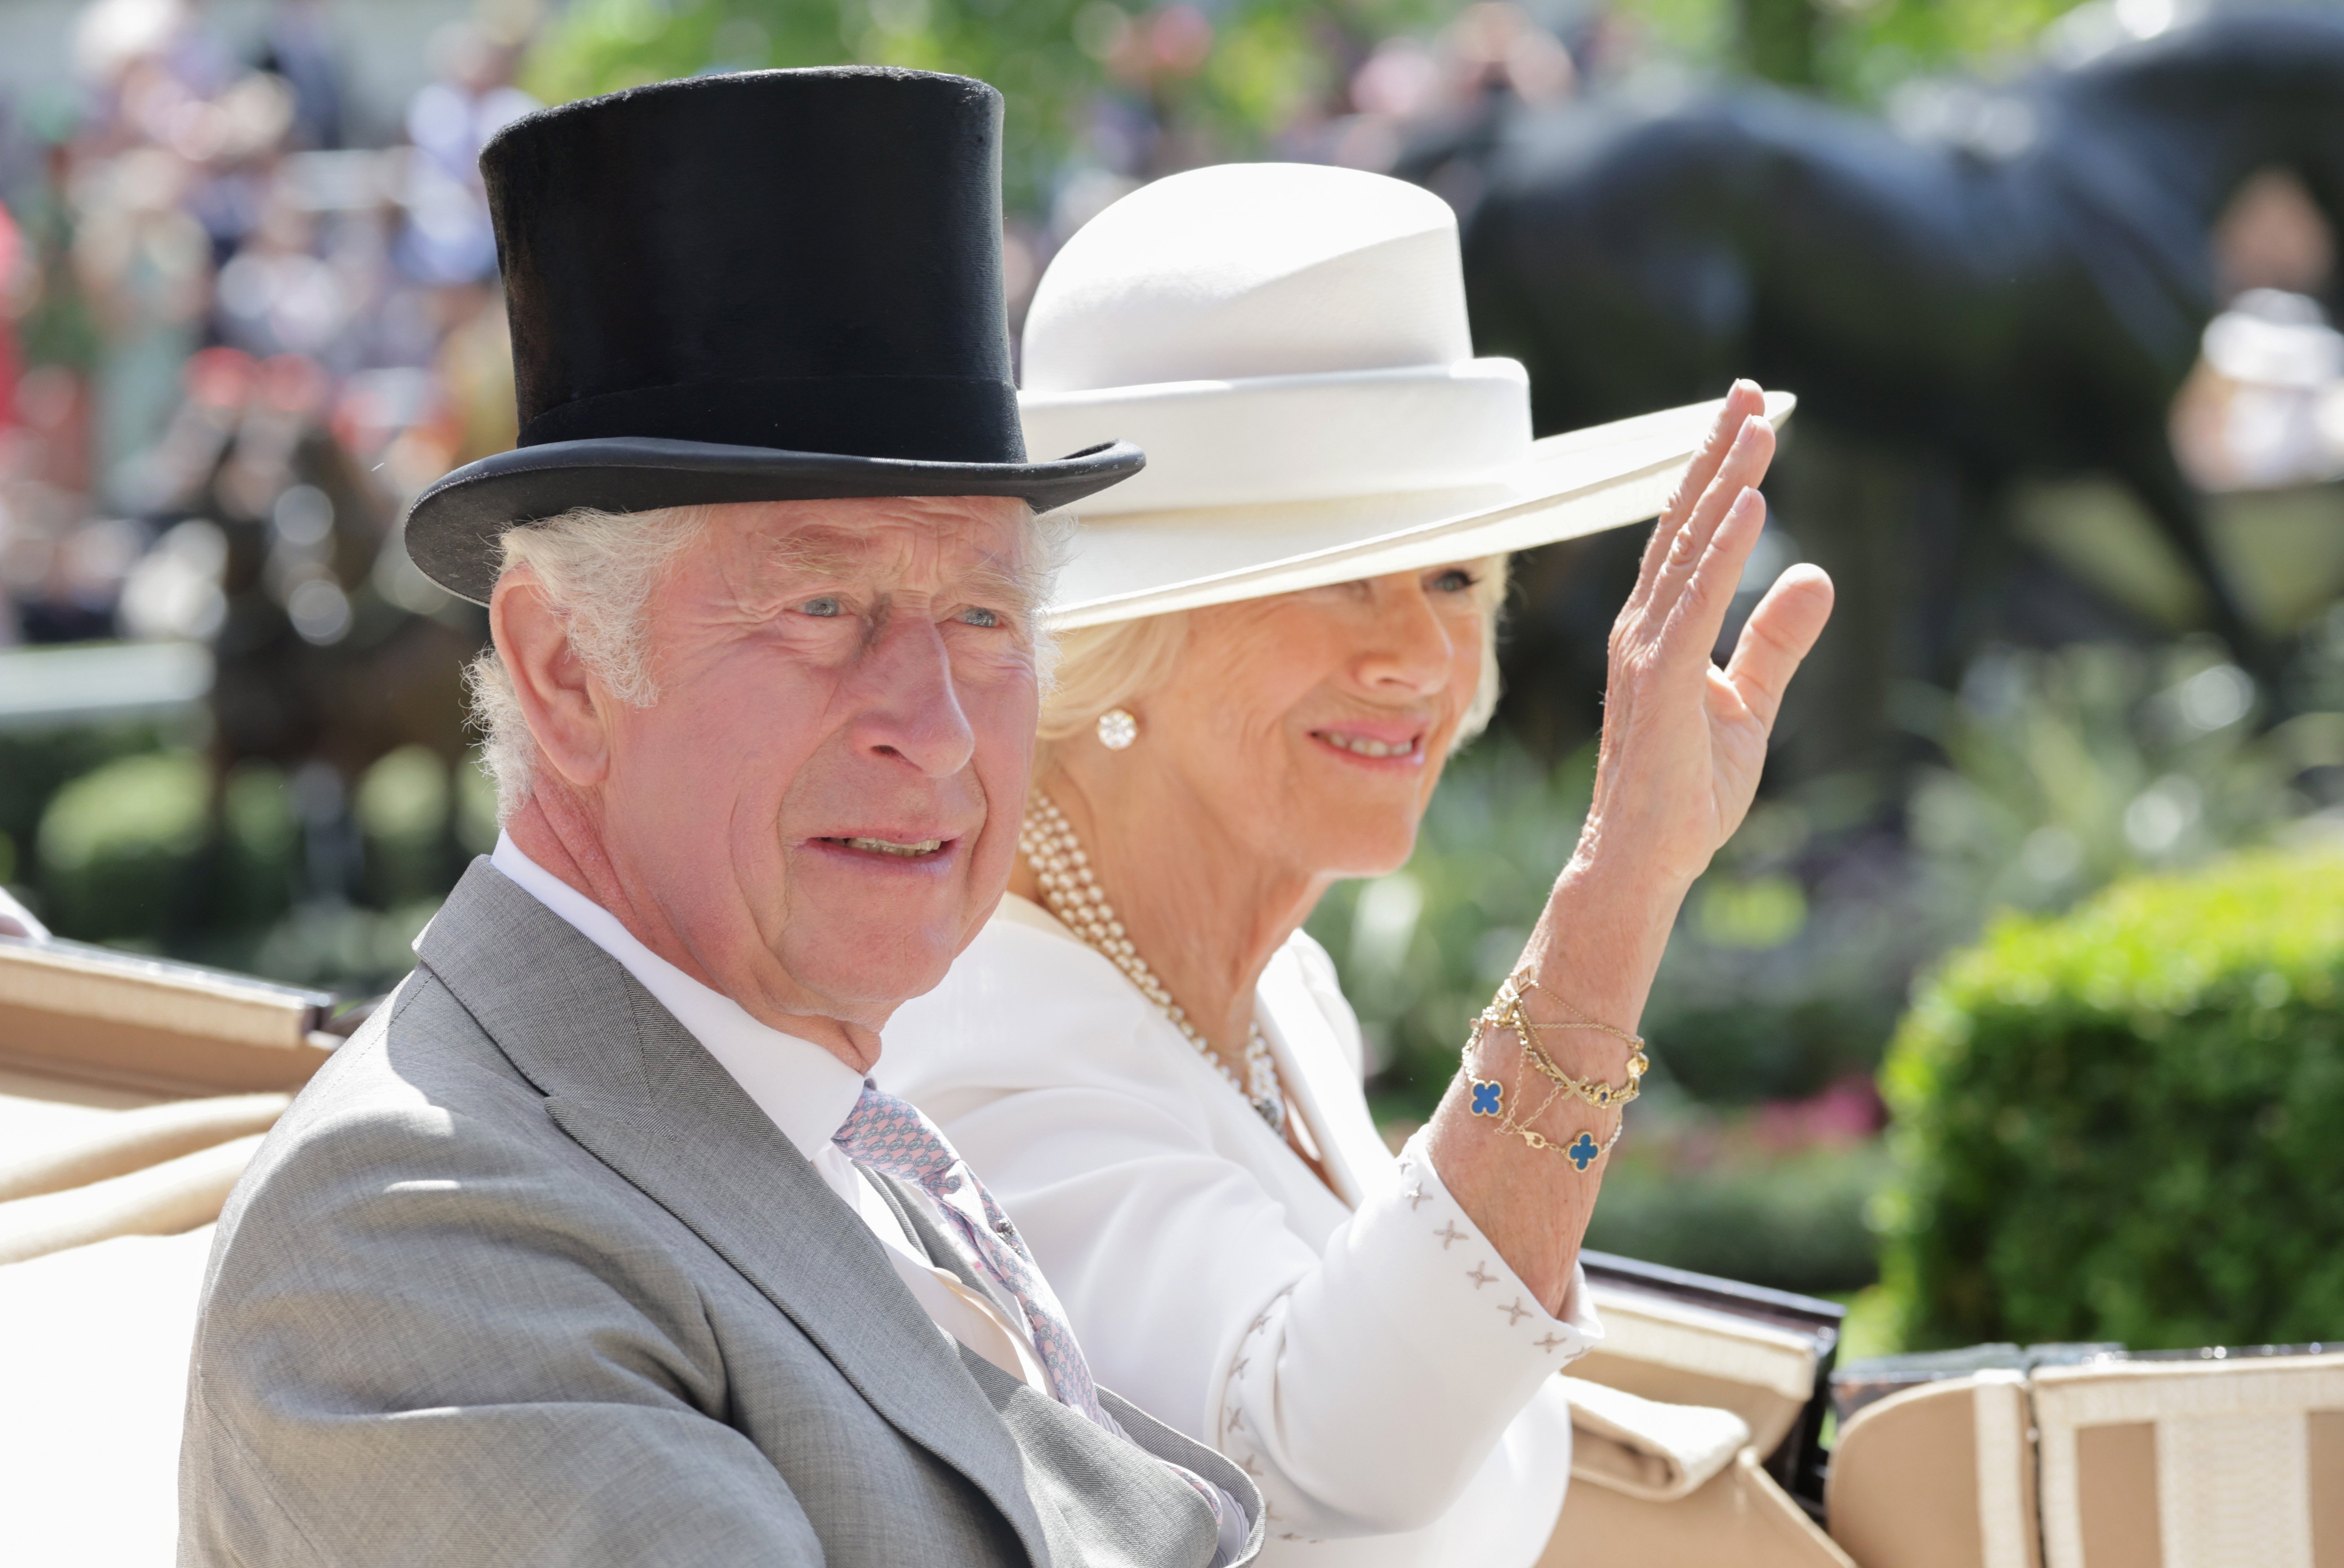 Camilla, Queen Consort pictured waving as she and King Charles arrive into the parade ring on the royal carriage as they attend Royal Ascot 2022 at Ascot Racecourse on June 15, 2022 in Ascot, England. | Source: Getty Images